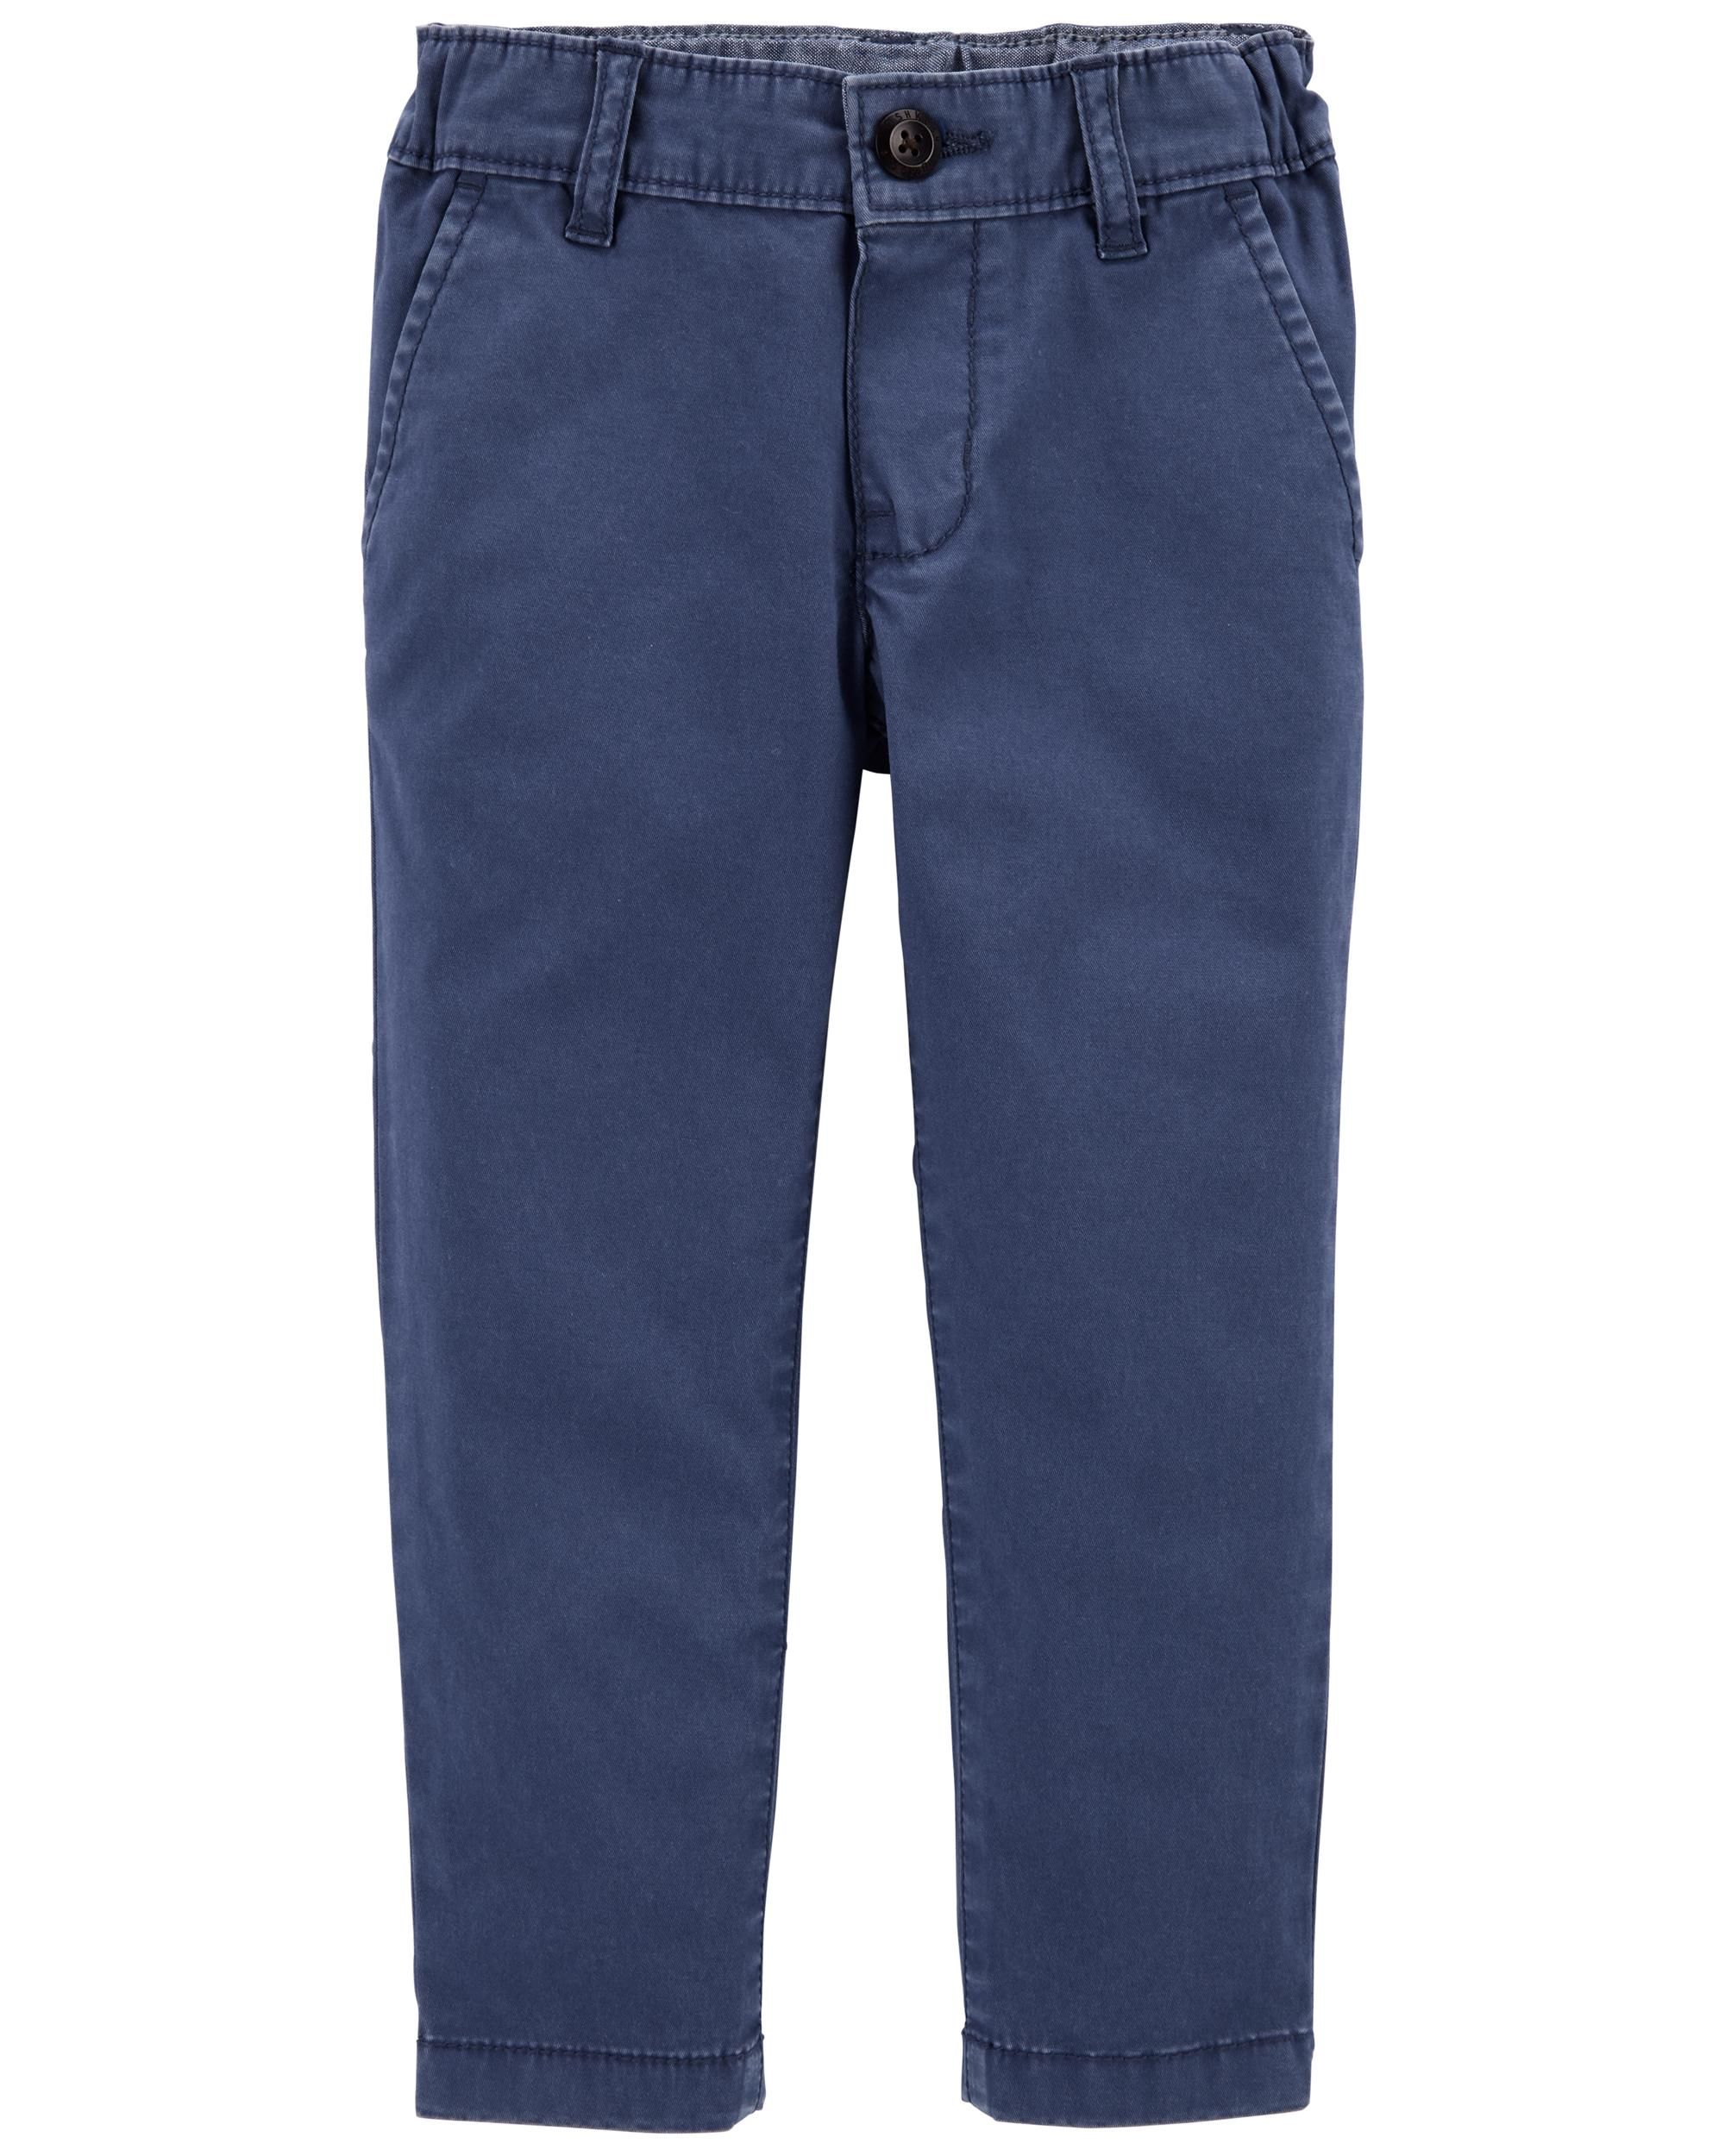 Slim Fit Stretch Chinos | Carter's